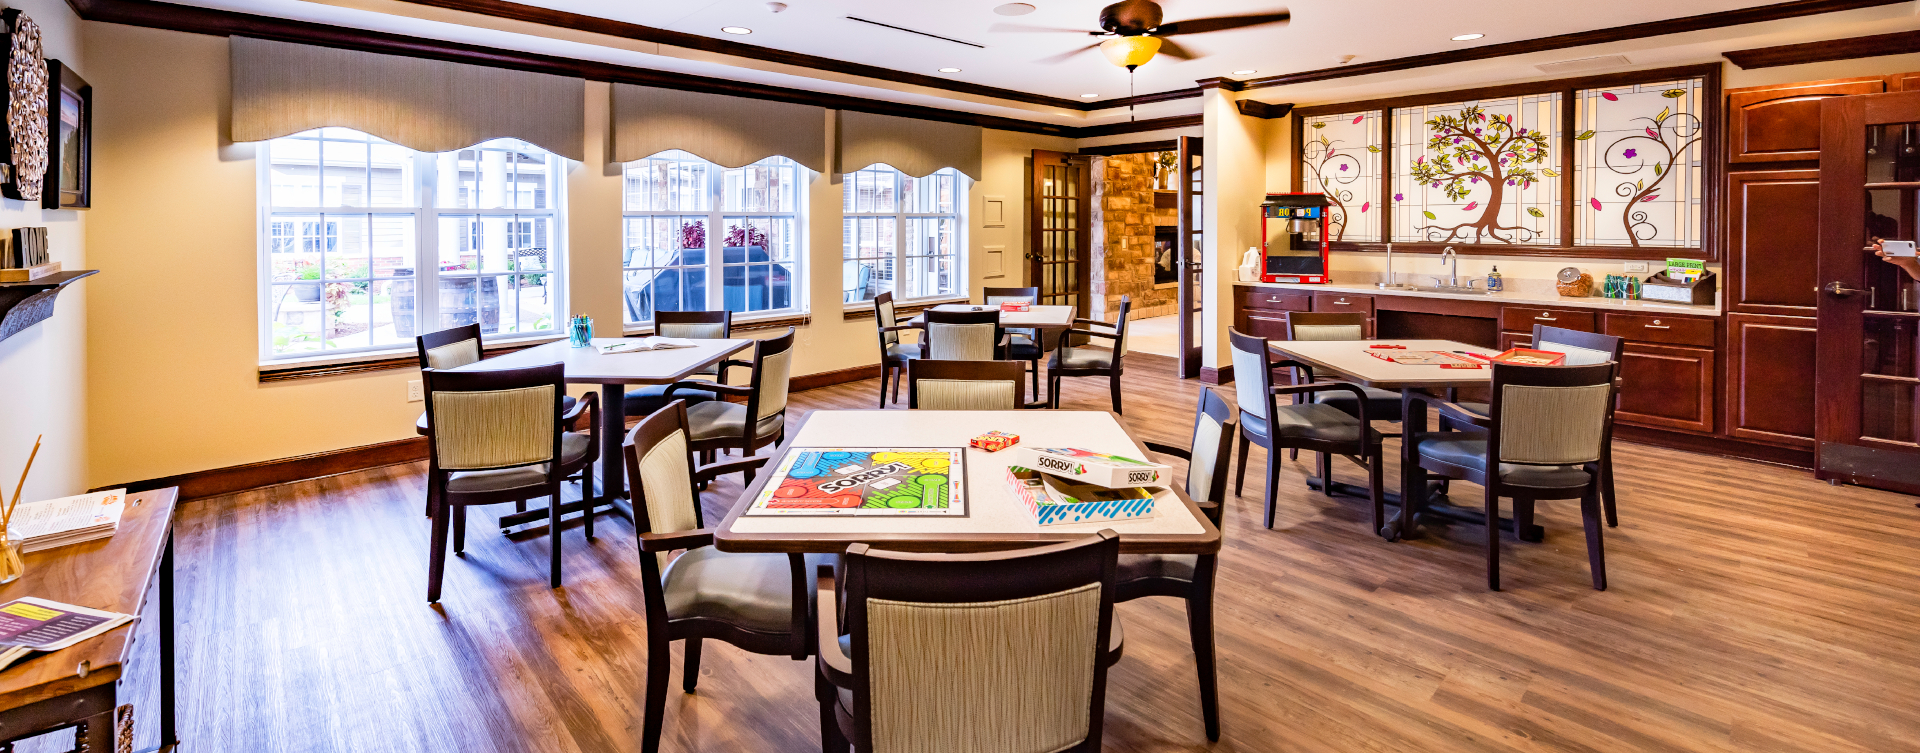 Relax with a good puzzle in the activity room at Bickford of Shelby Township